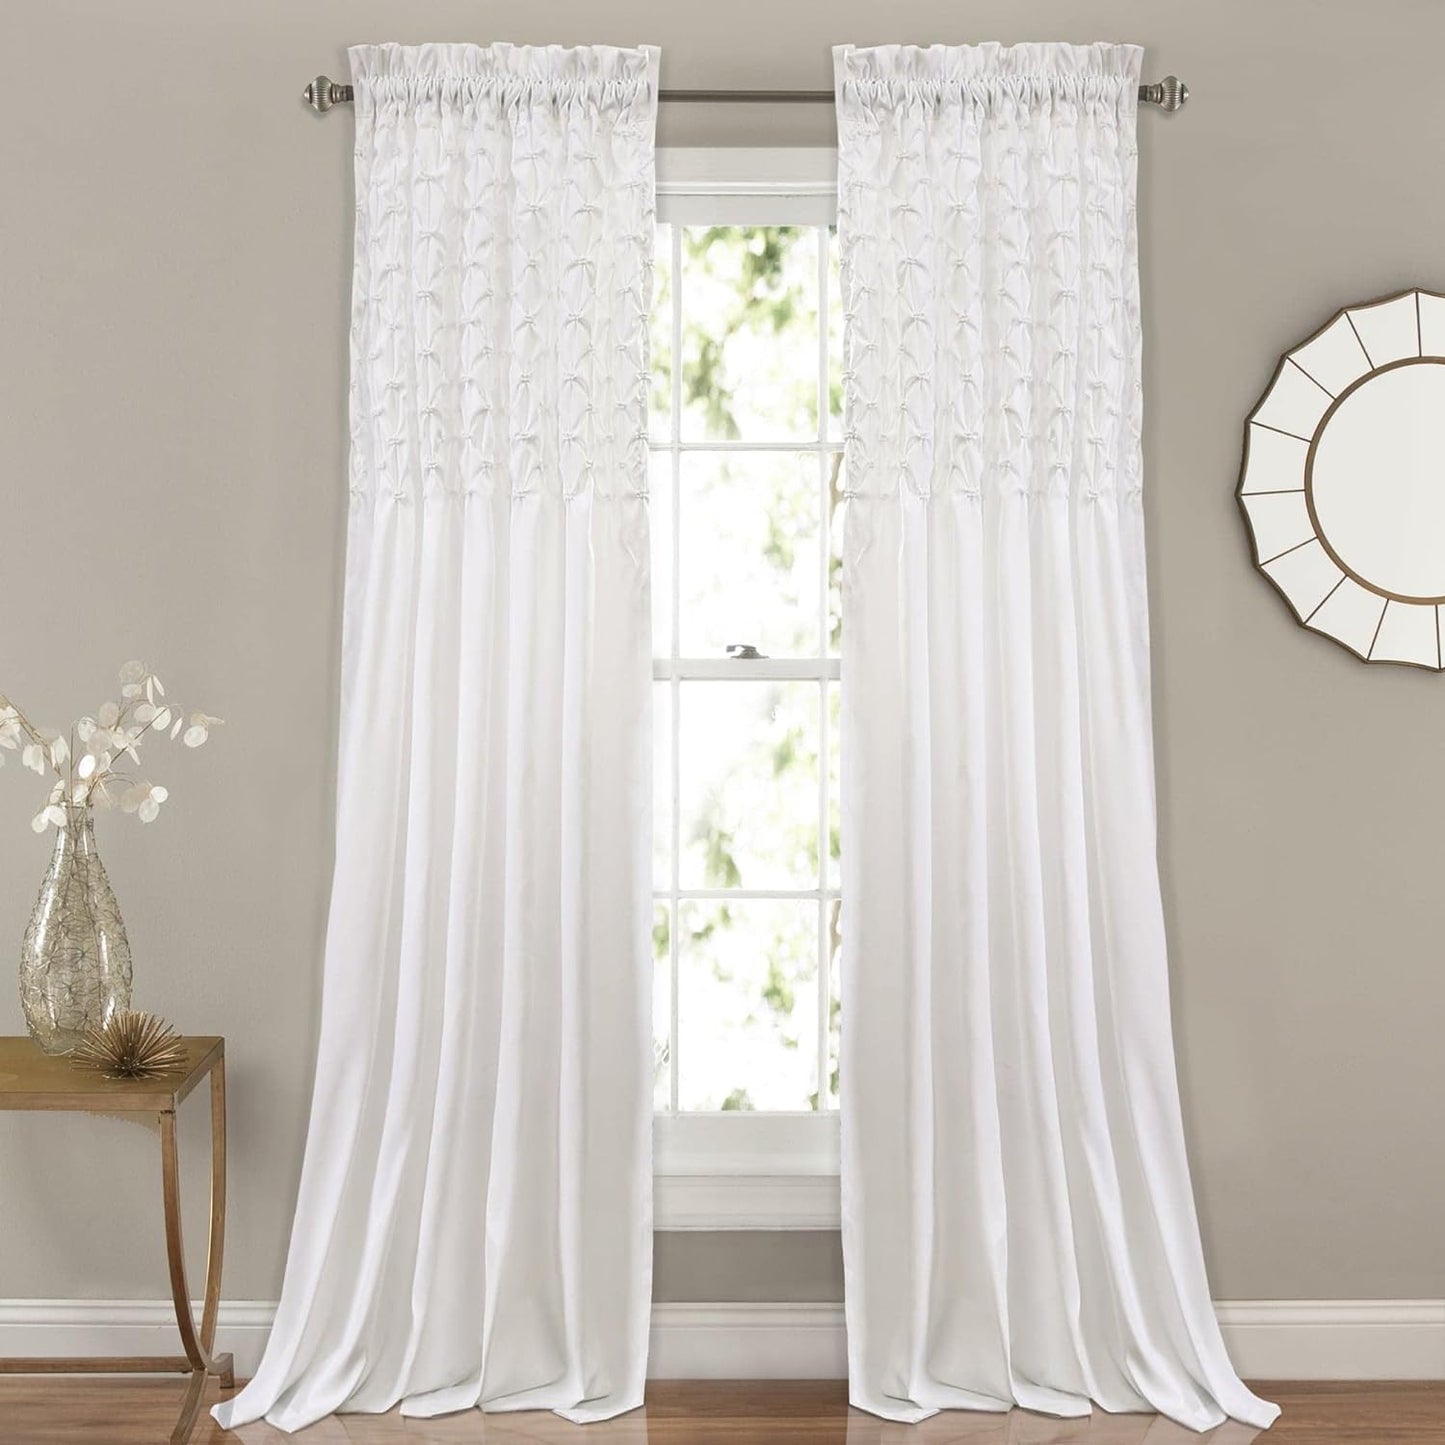 Lush Decor Bayview Curtains-Pintuck Textured Semi Sheer Window Panel Drapes Set for Living, Dining, Bedroom (Pair), 54" W X 84" L, White  Triangle Home Fashions White 54"W X 95"L 